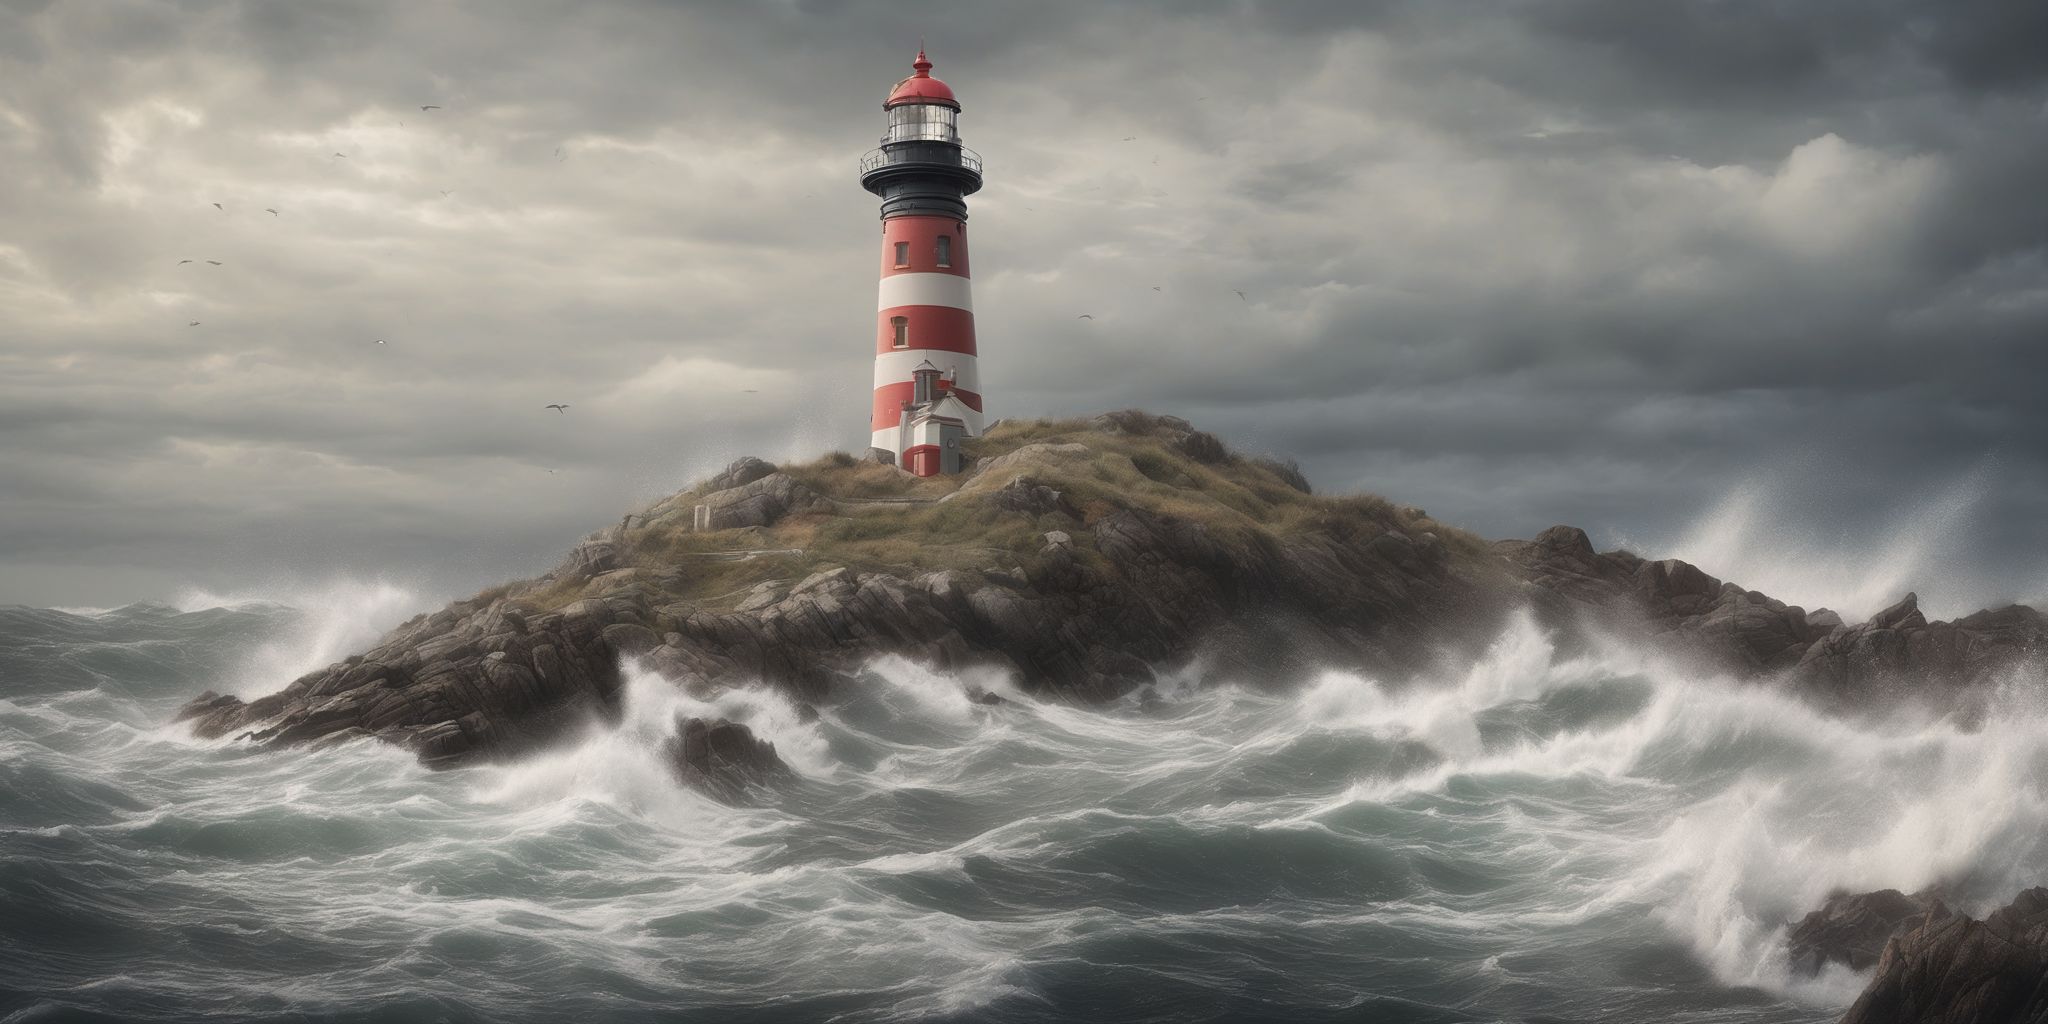 Lighthouse  in realistic, photographic style